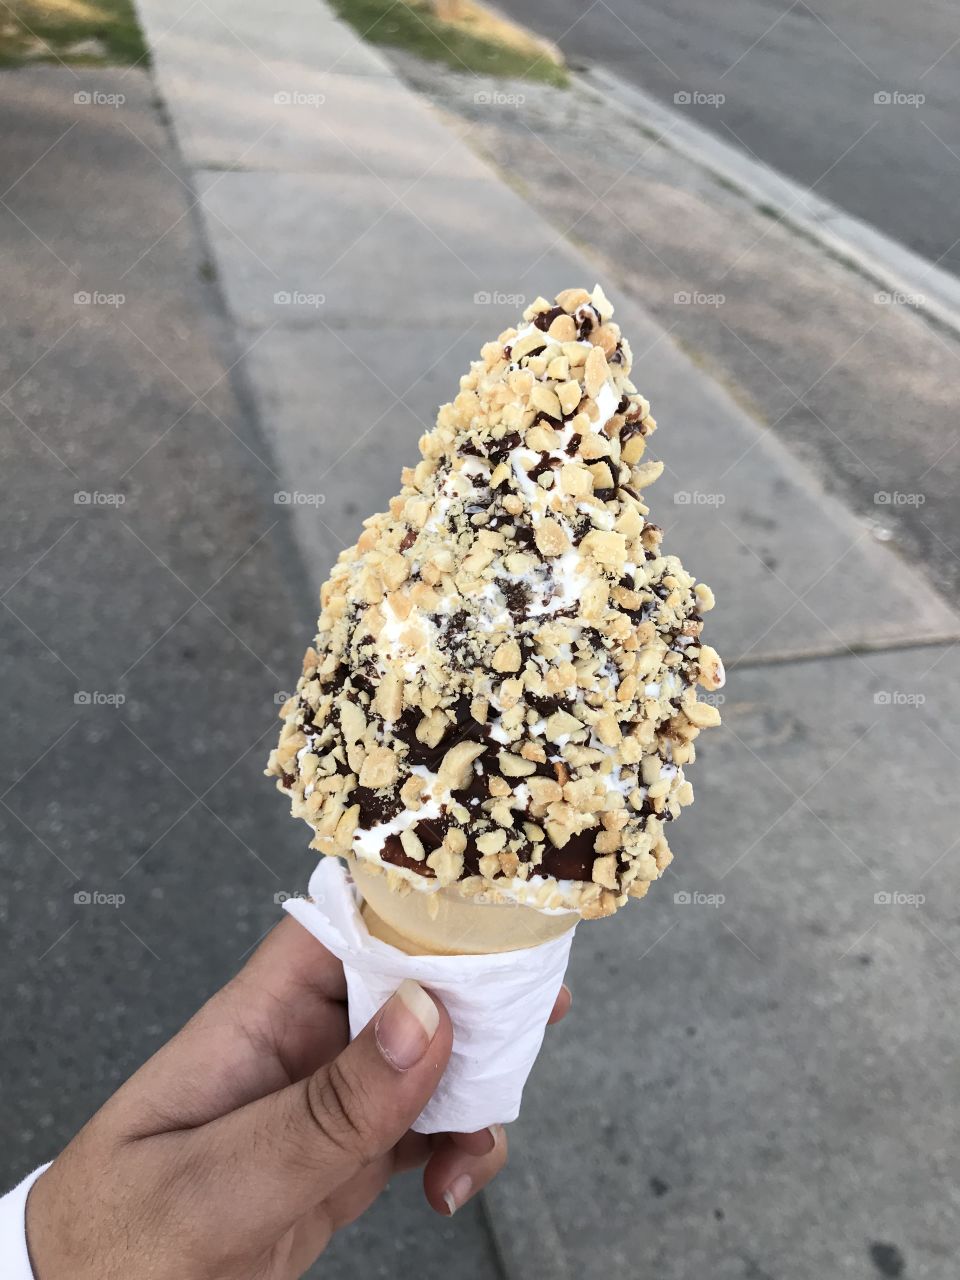 Vanilla cone dipped in Chocolate and Peanuts 😍